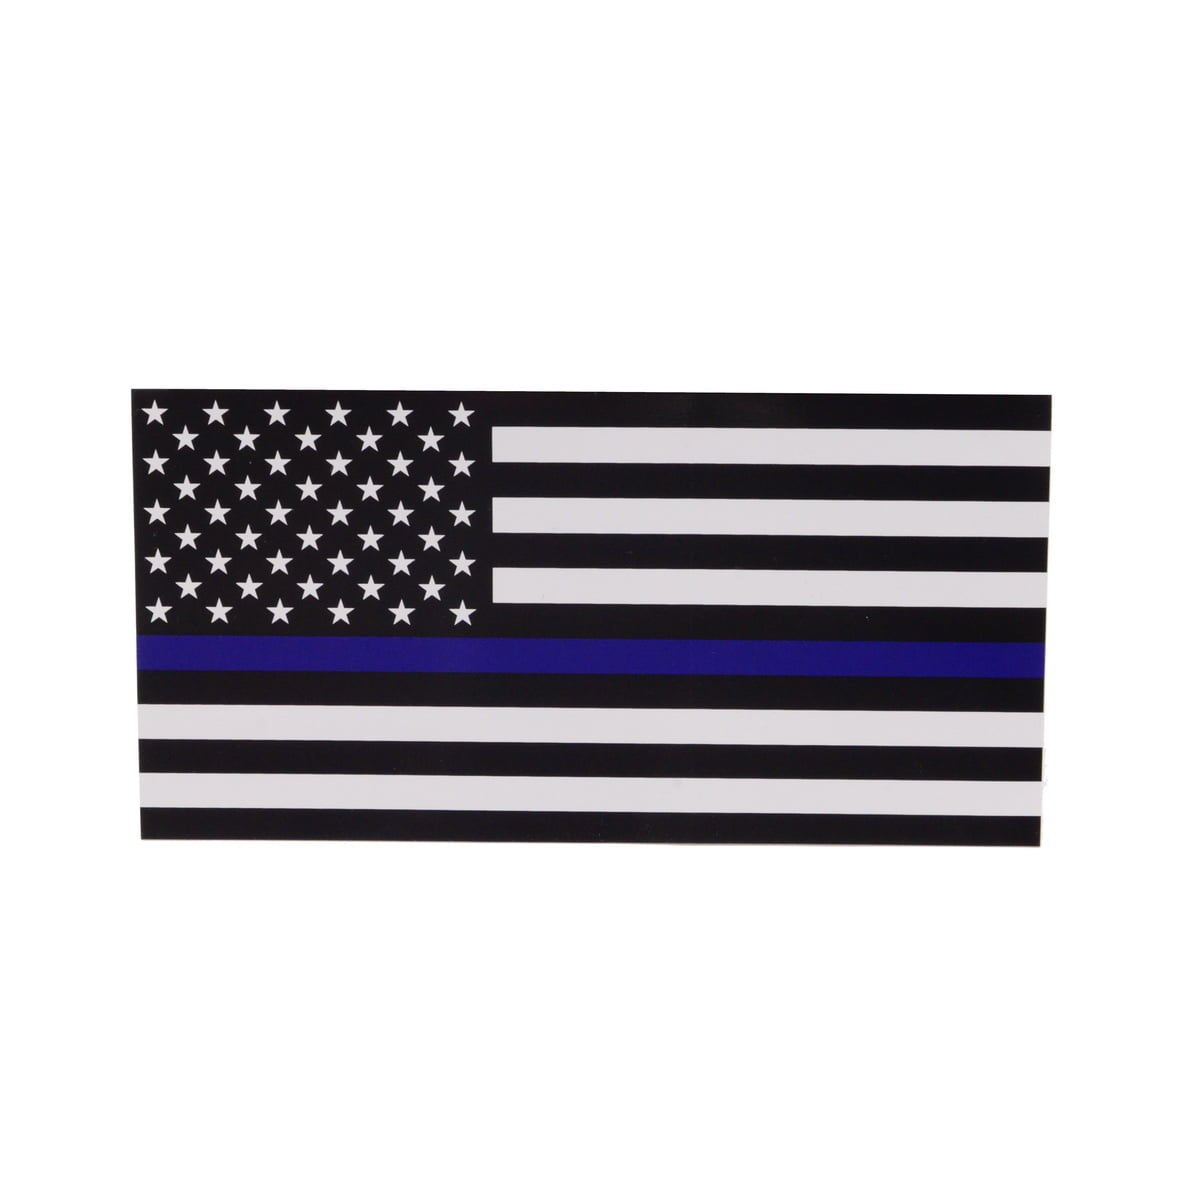 Police Thin Blue Line Decal American Flag bumper sticker Law Enforcement Officer 